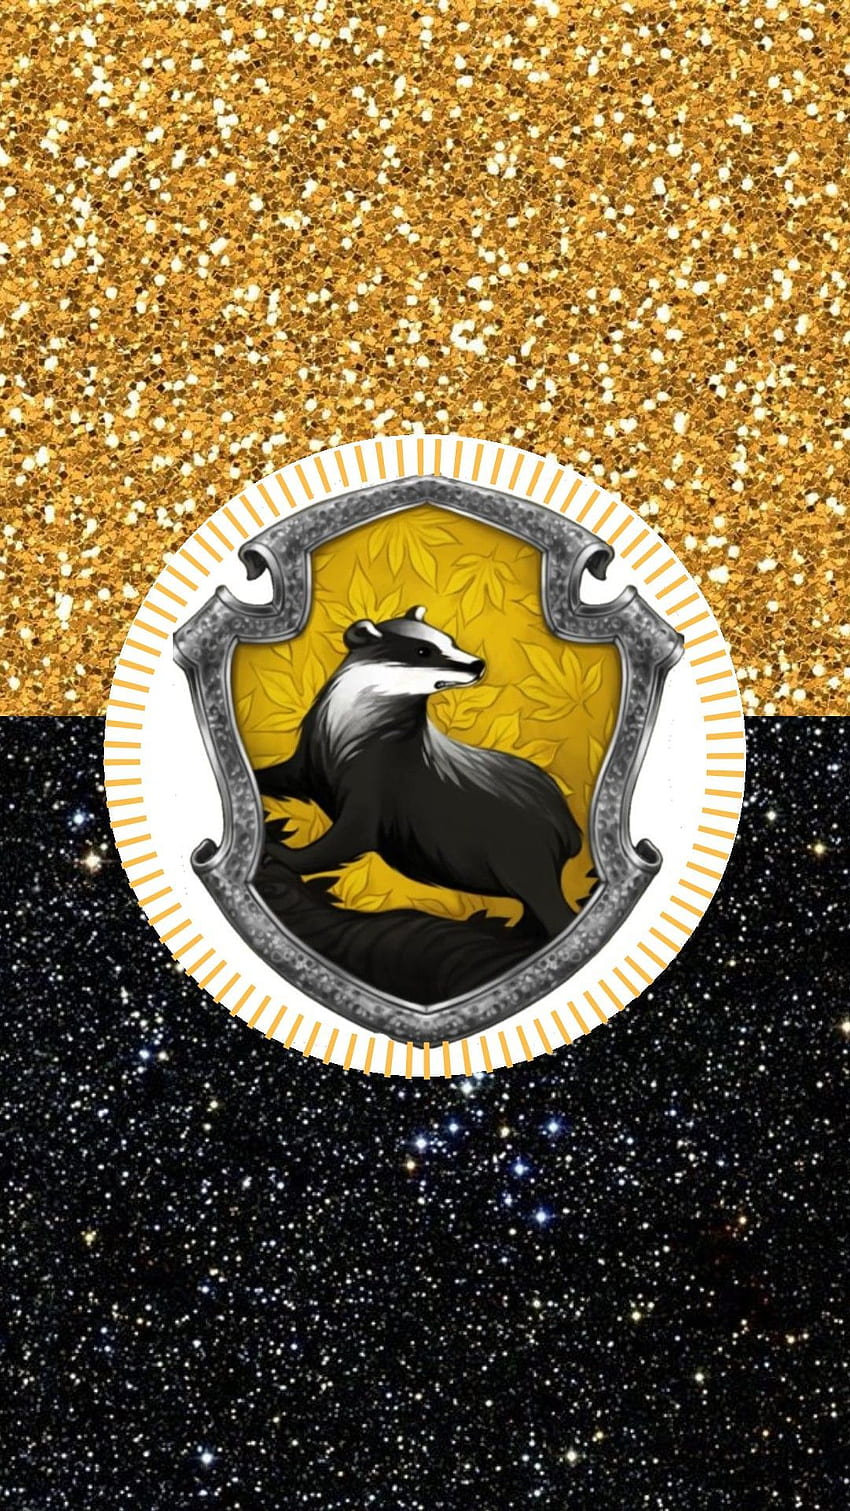 A phone wallpaper of the Hufflepuff crest against a black and gold background - Hufflepuff